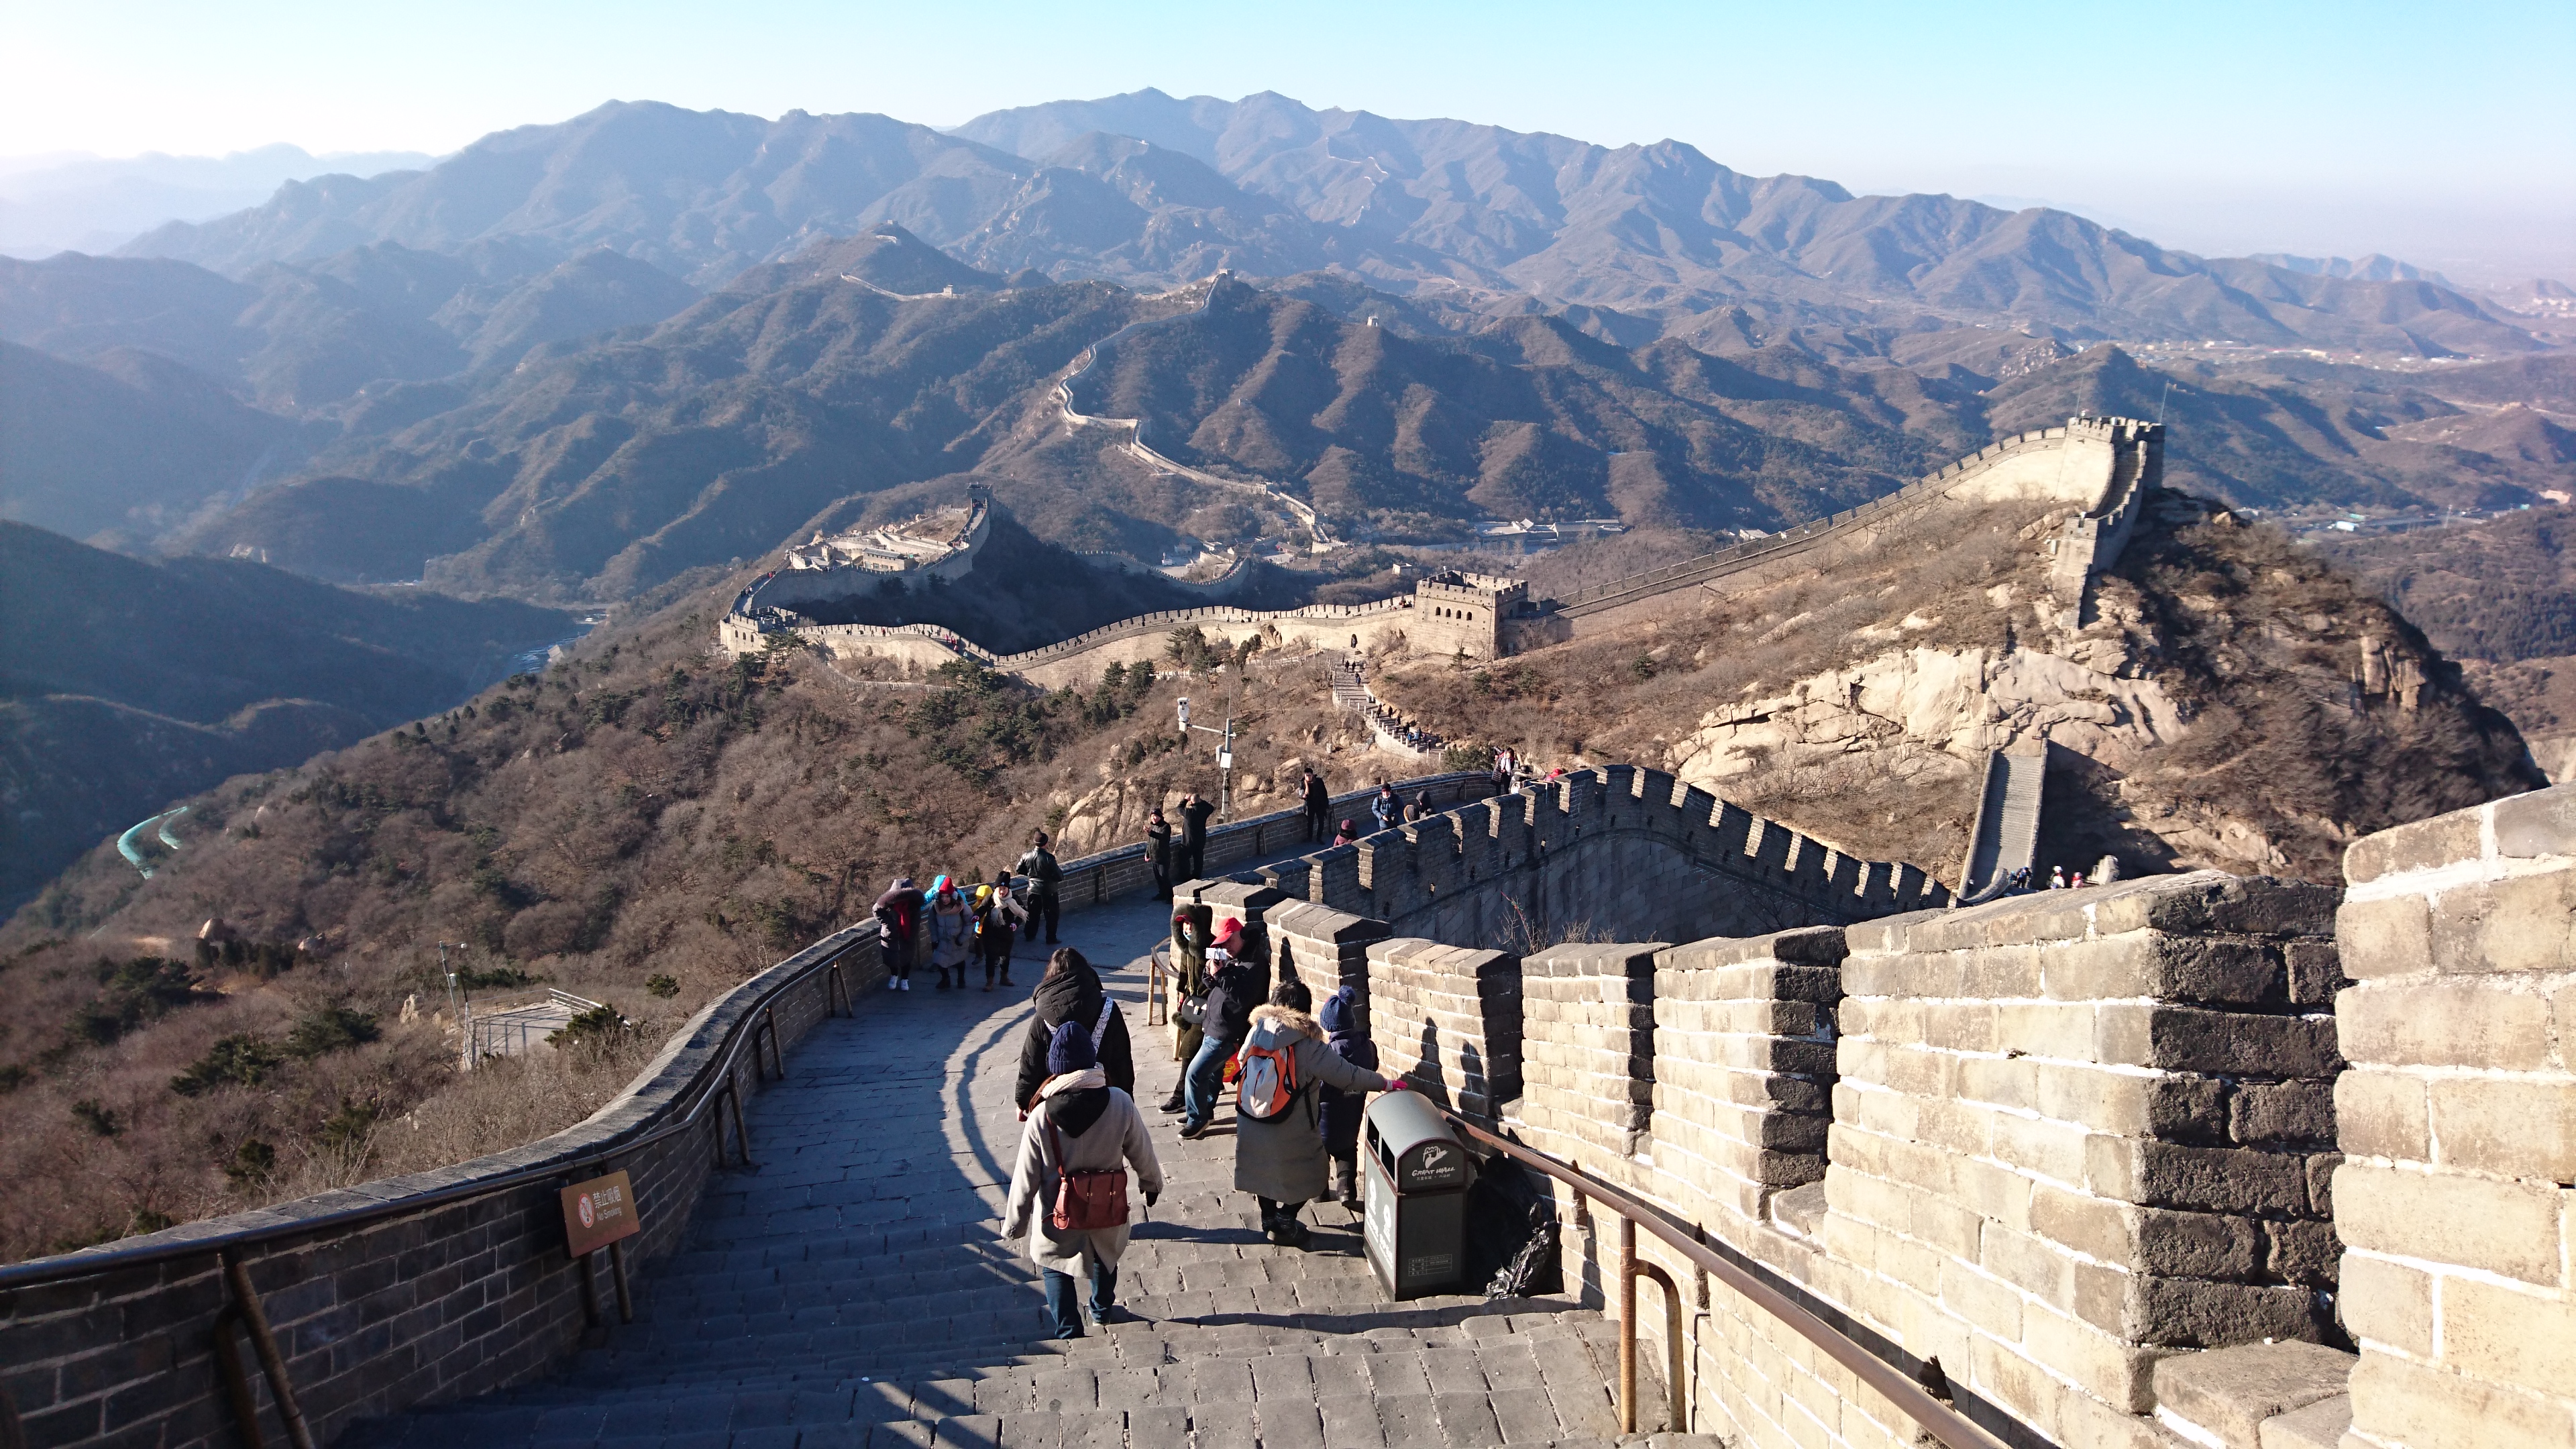 Badaling Section of the Great Wall of China